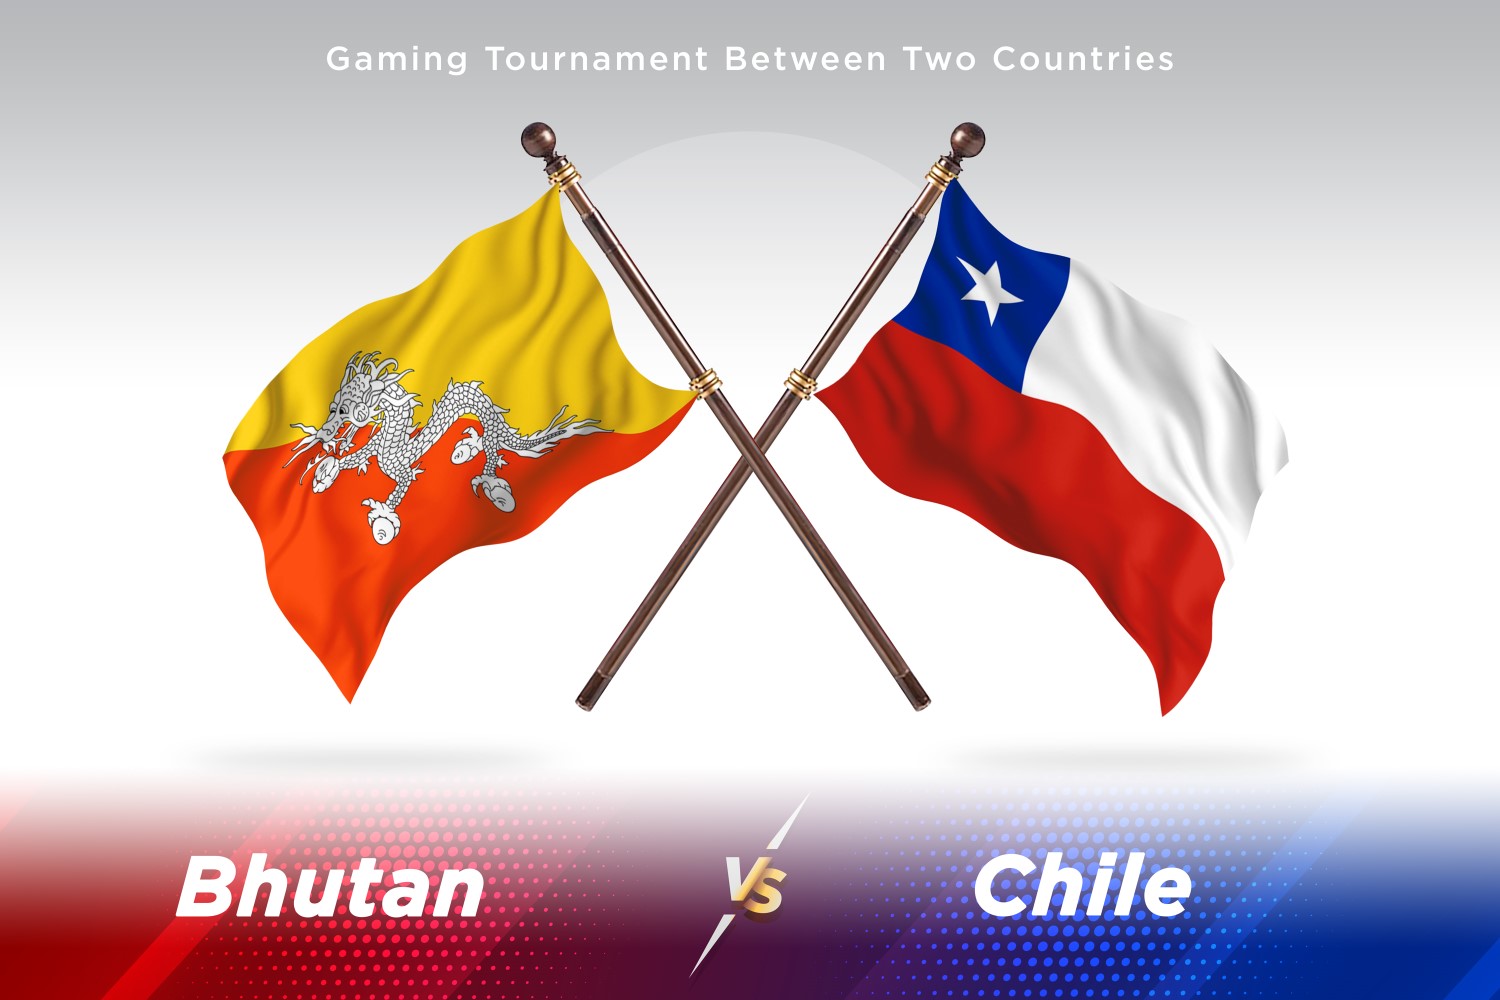 Bhutan versus Chile Two Flags